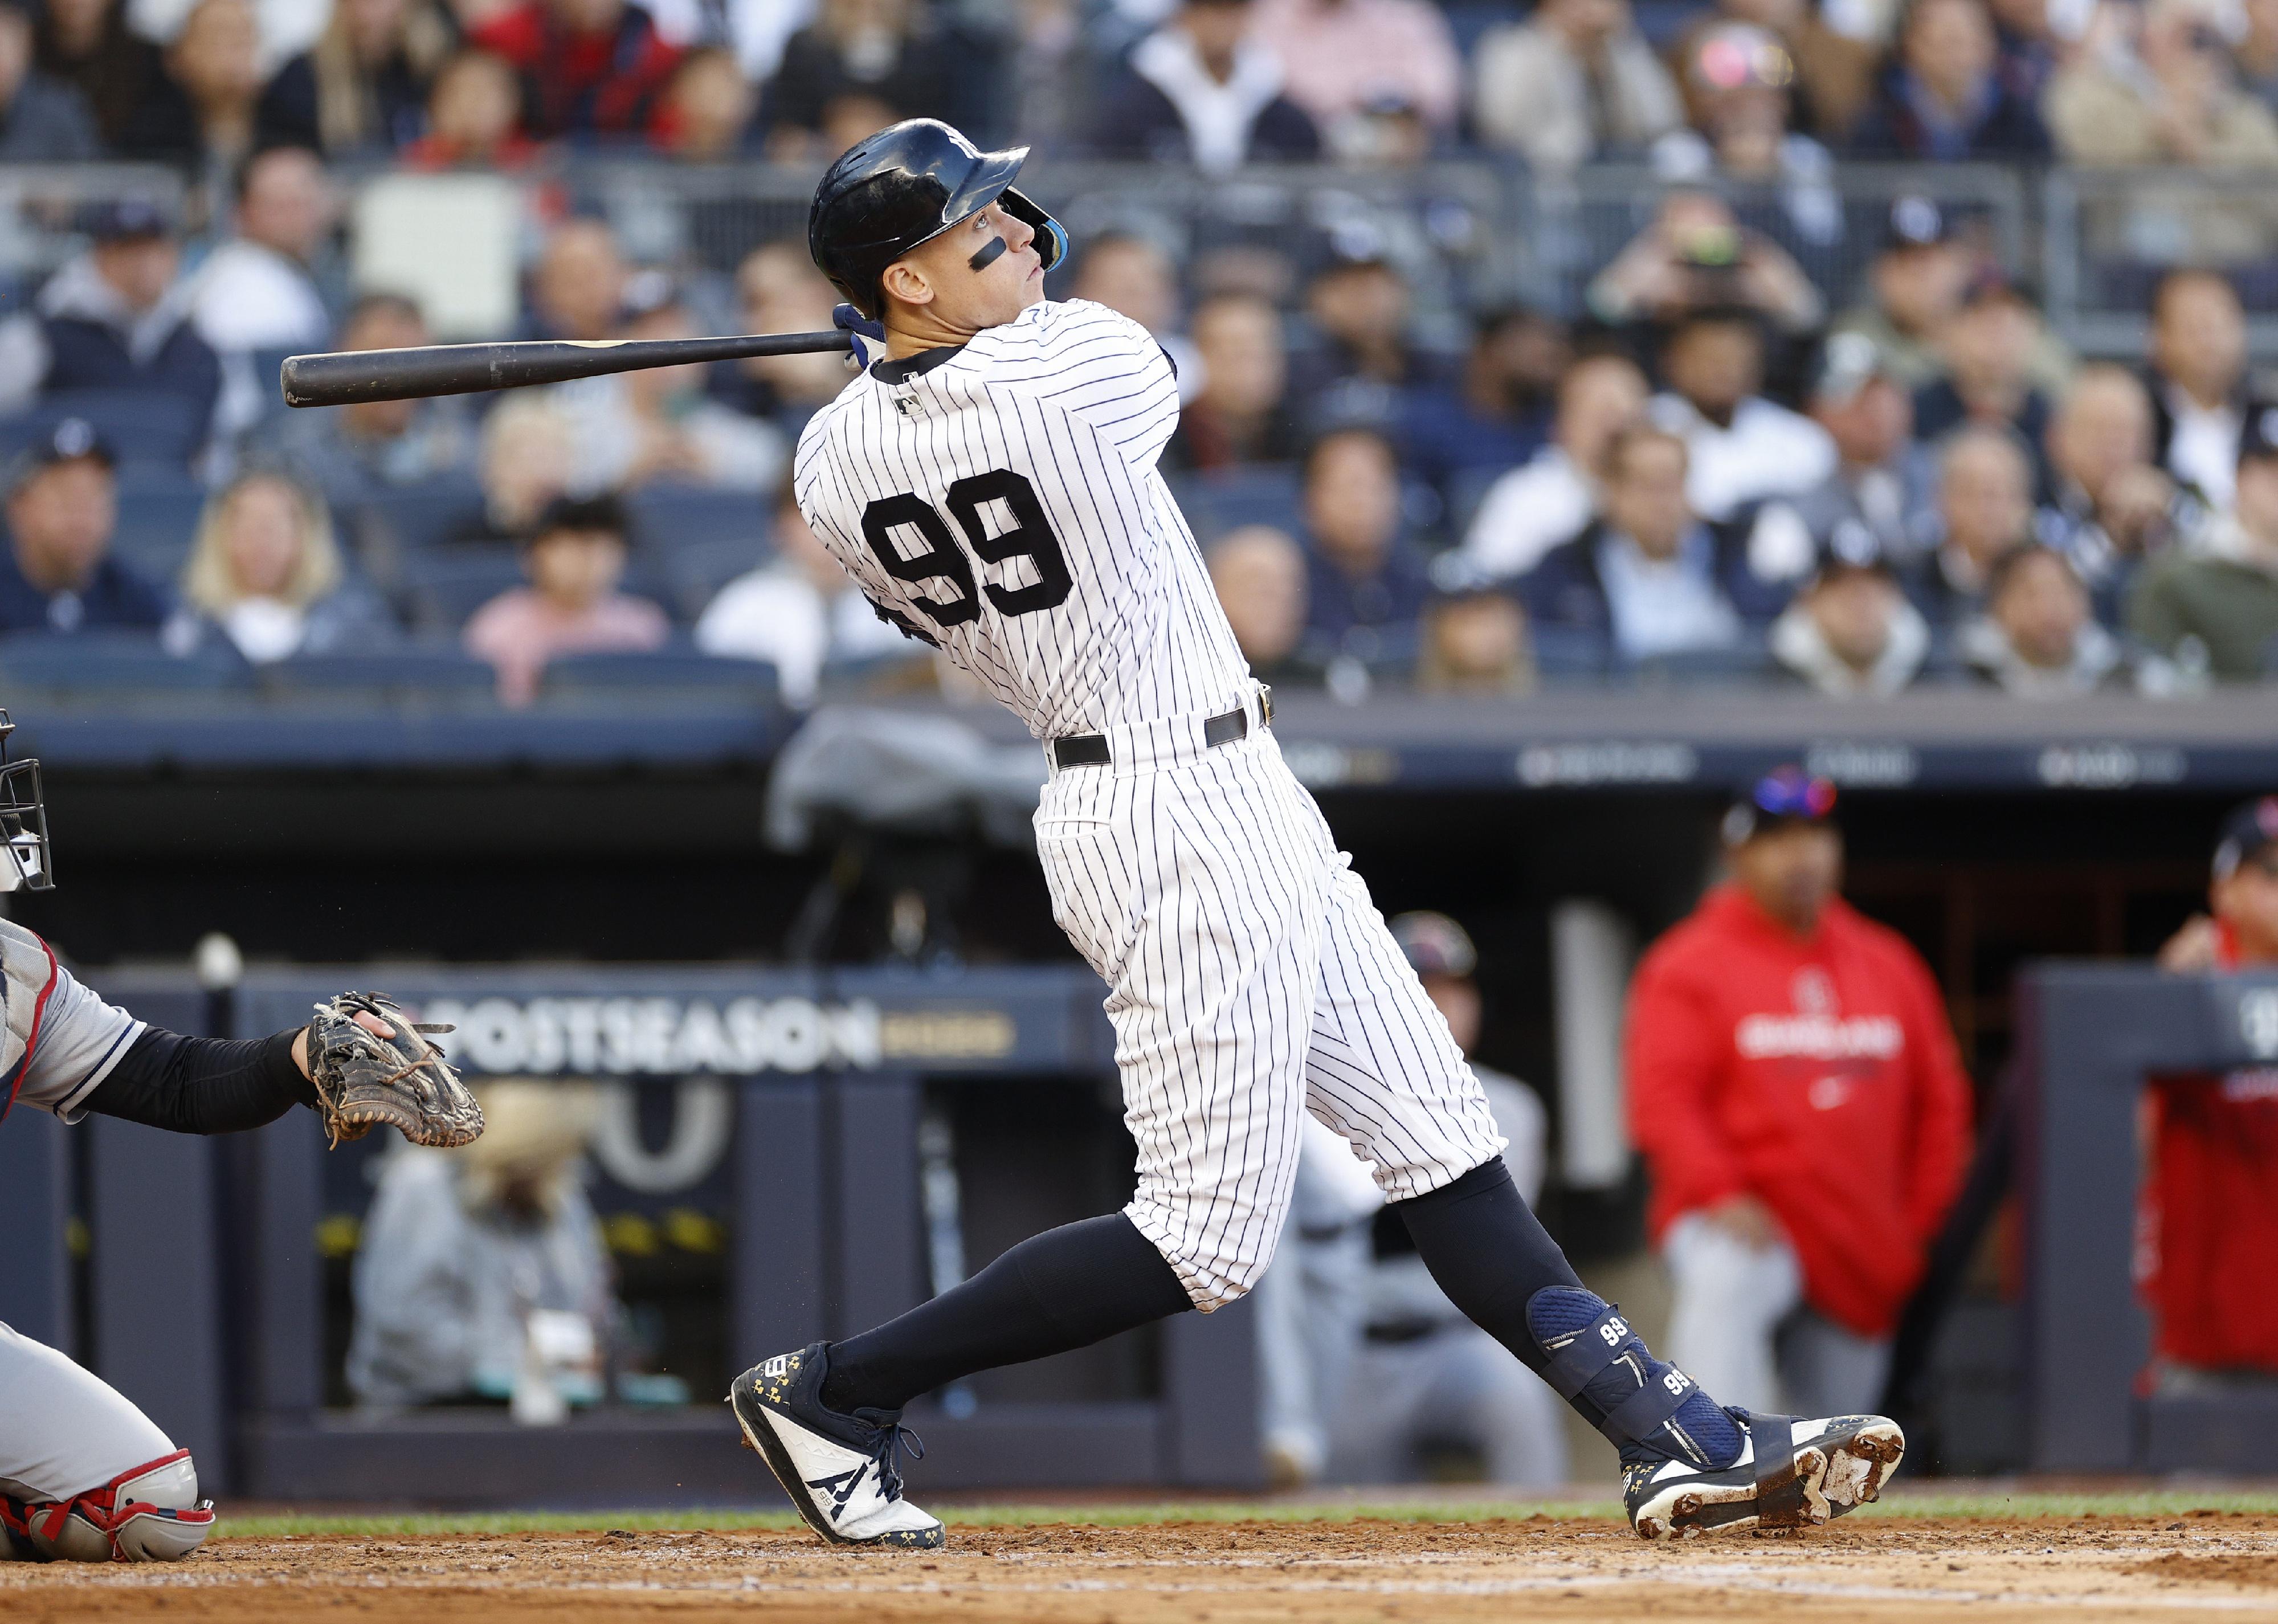 Aaron Judge of the New York Yankees hits a home run.